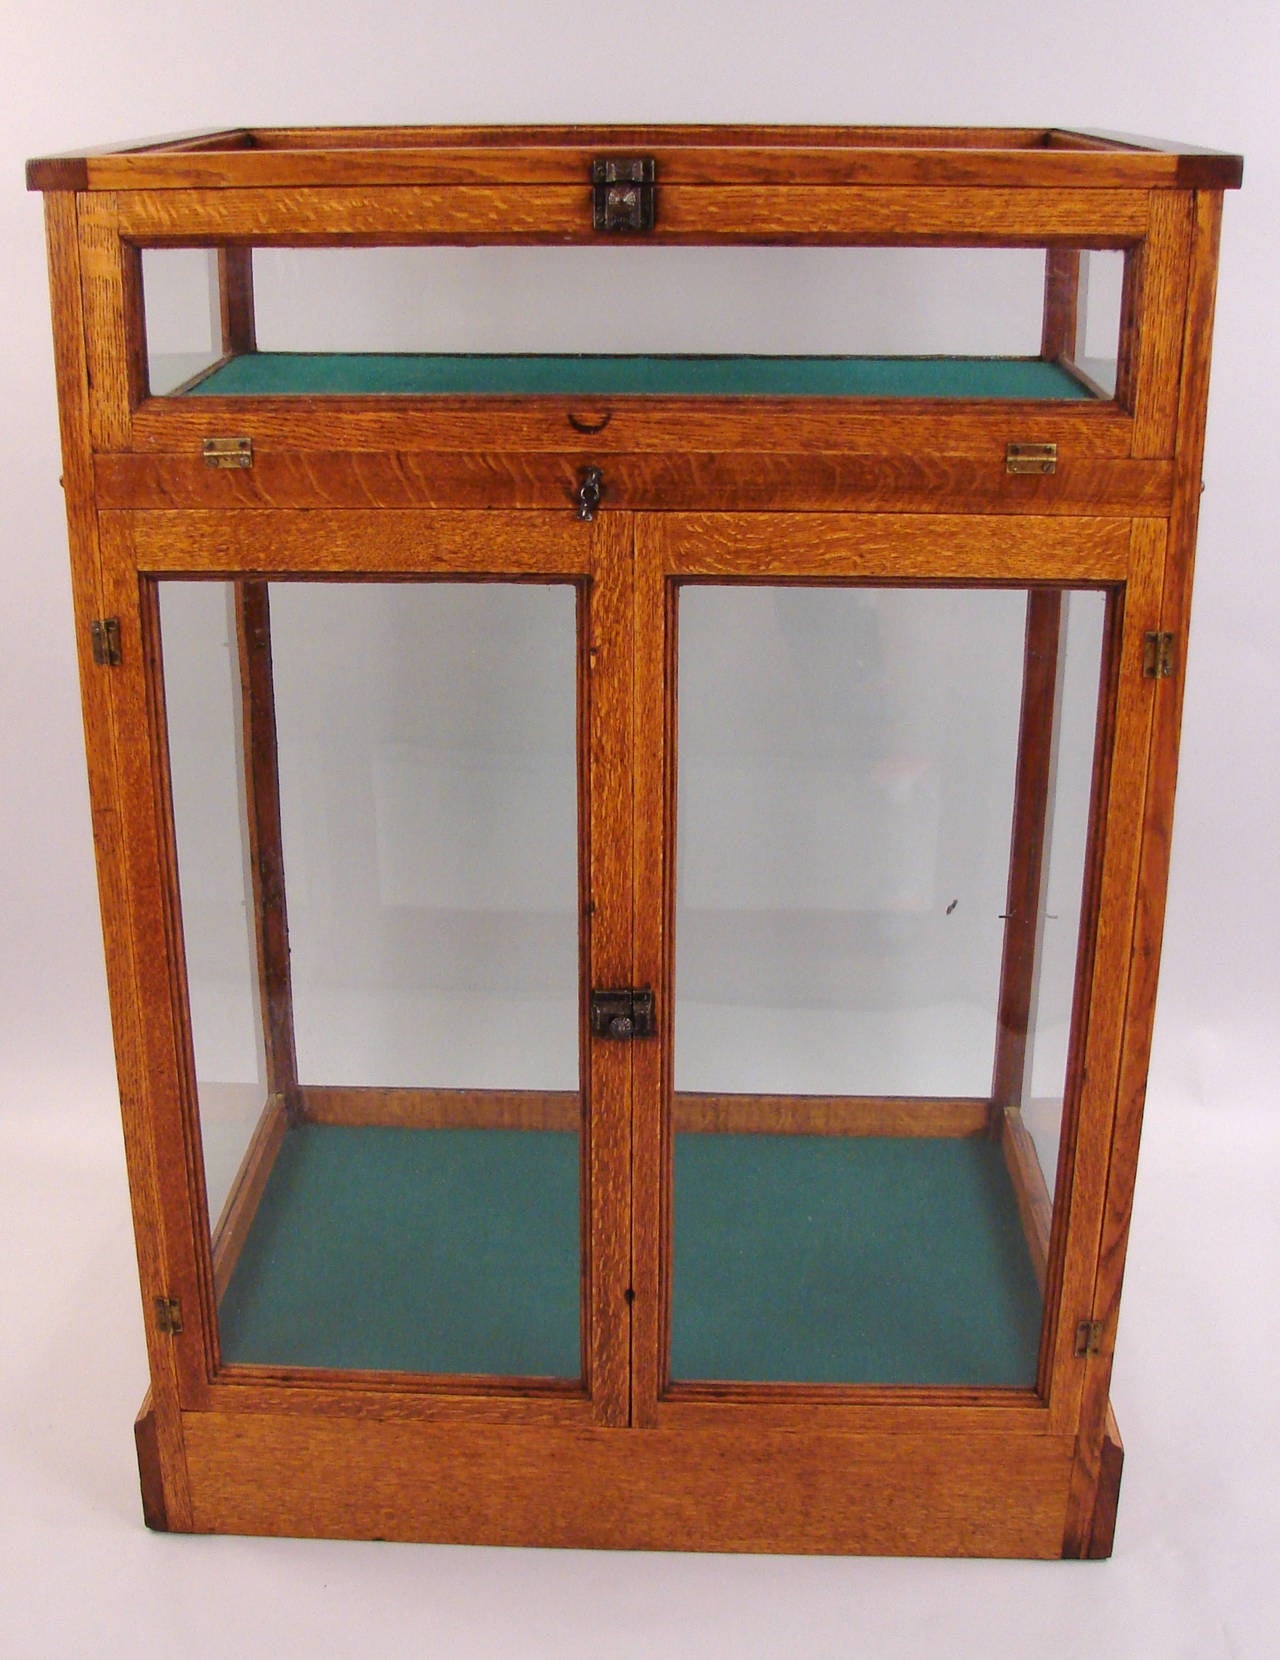 An American oak showcase divided into an upper stage with a removable beveled glass top over a lower stage with 3 later glass shelves. 
Made by and labeled 